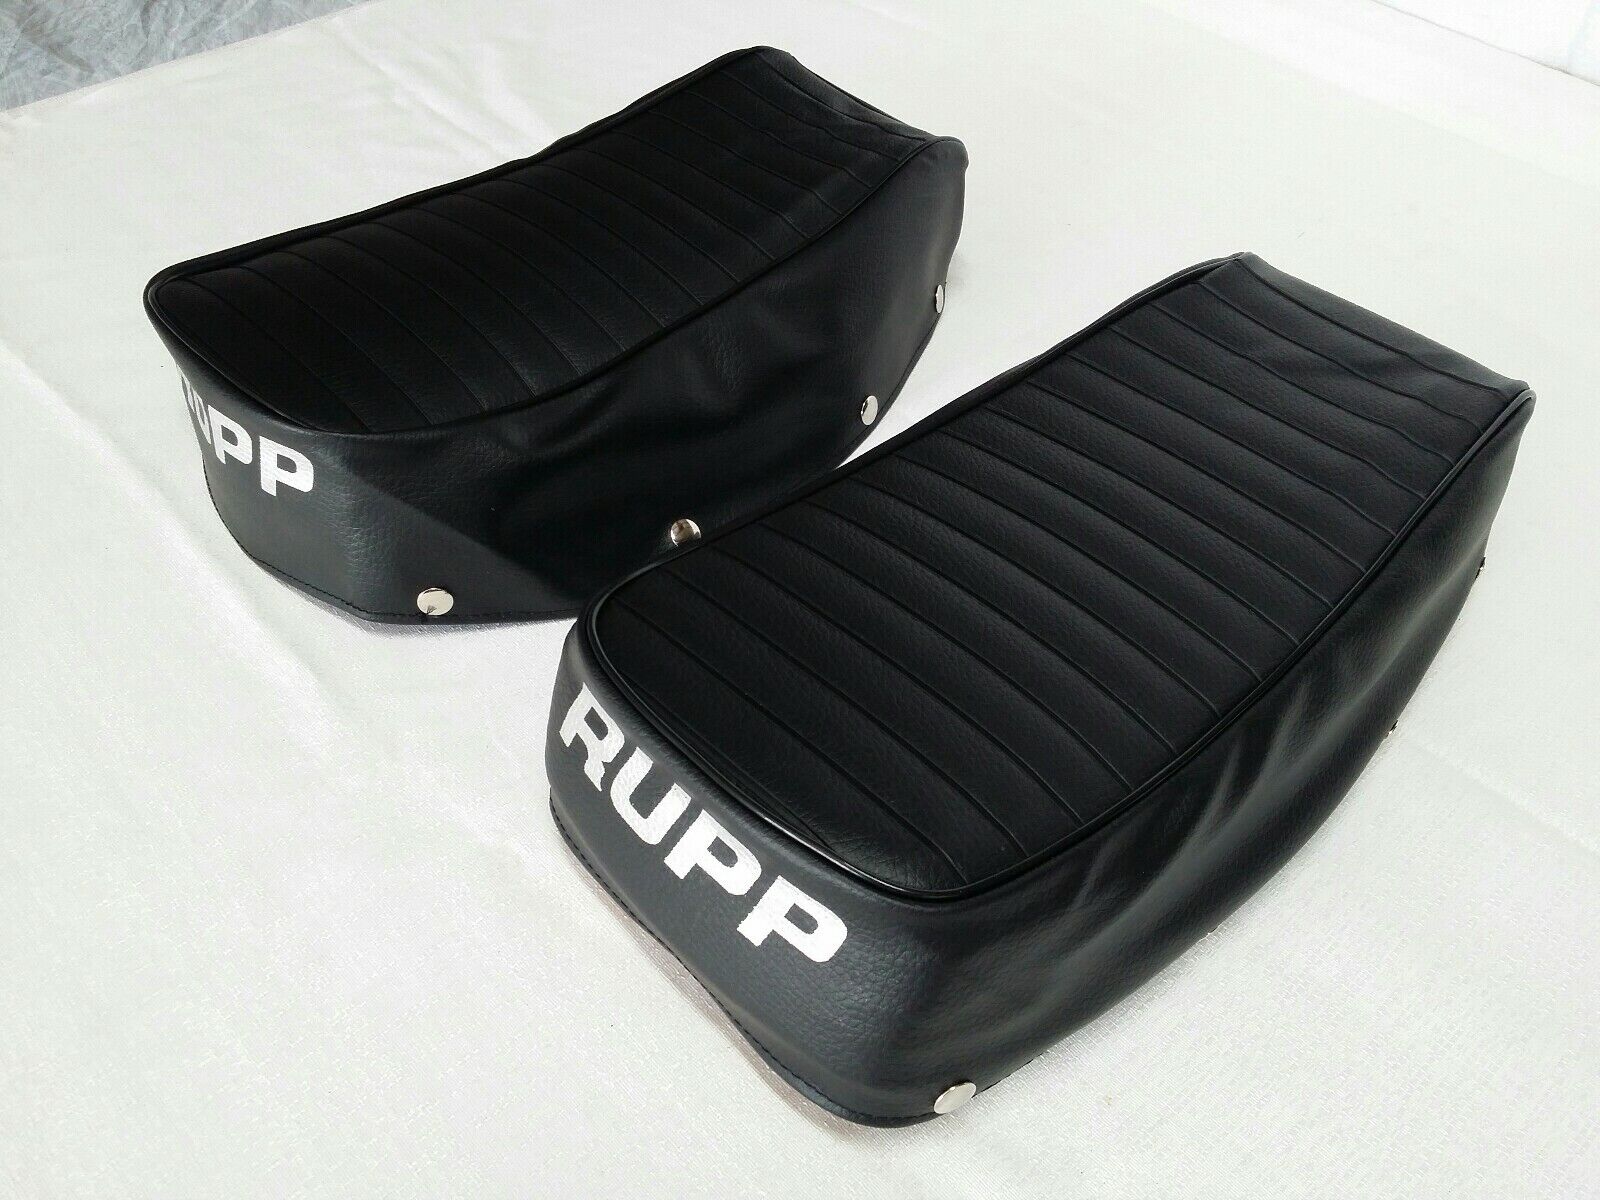 RUPP ROADSTER 2 SEAT COVER BLACK (snaps in places) BEST QUALITY (R*#2)